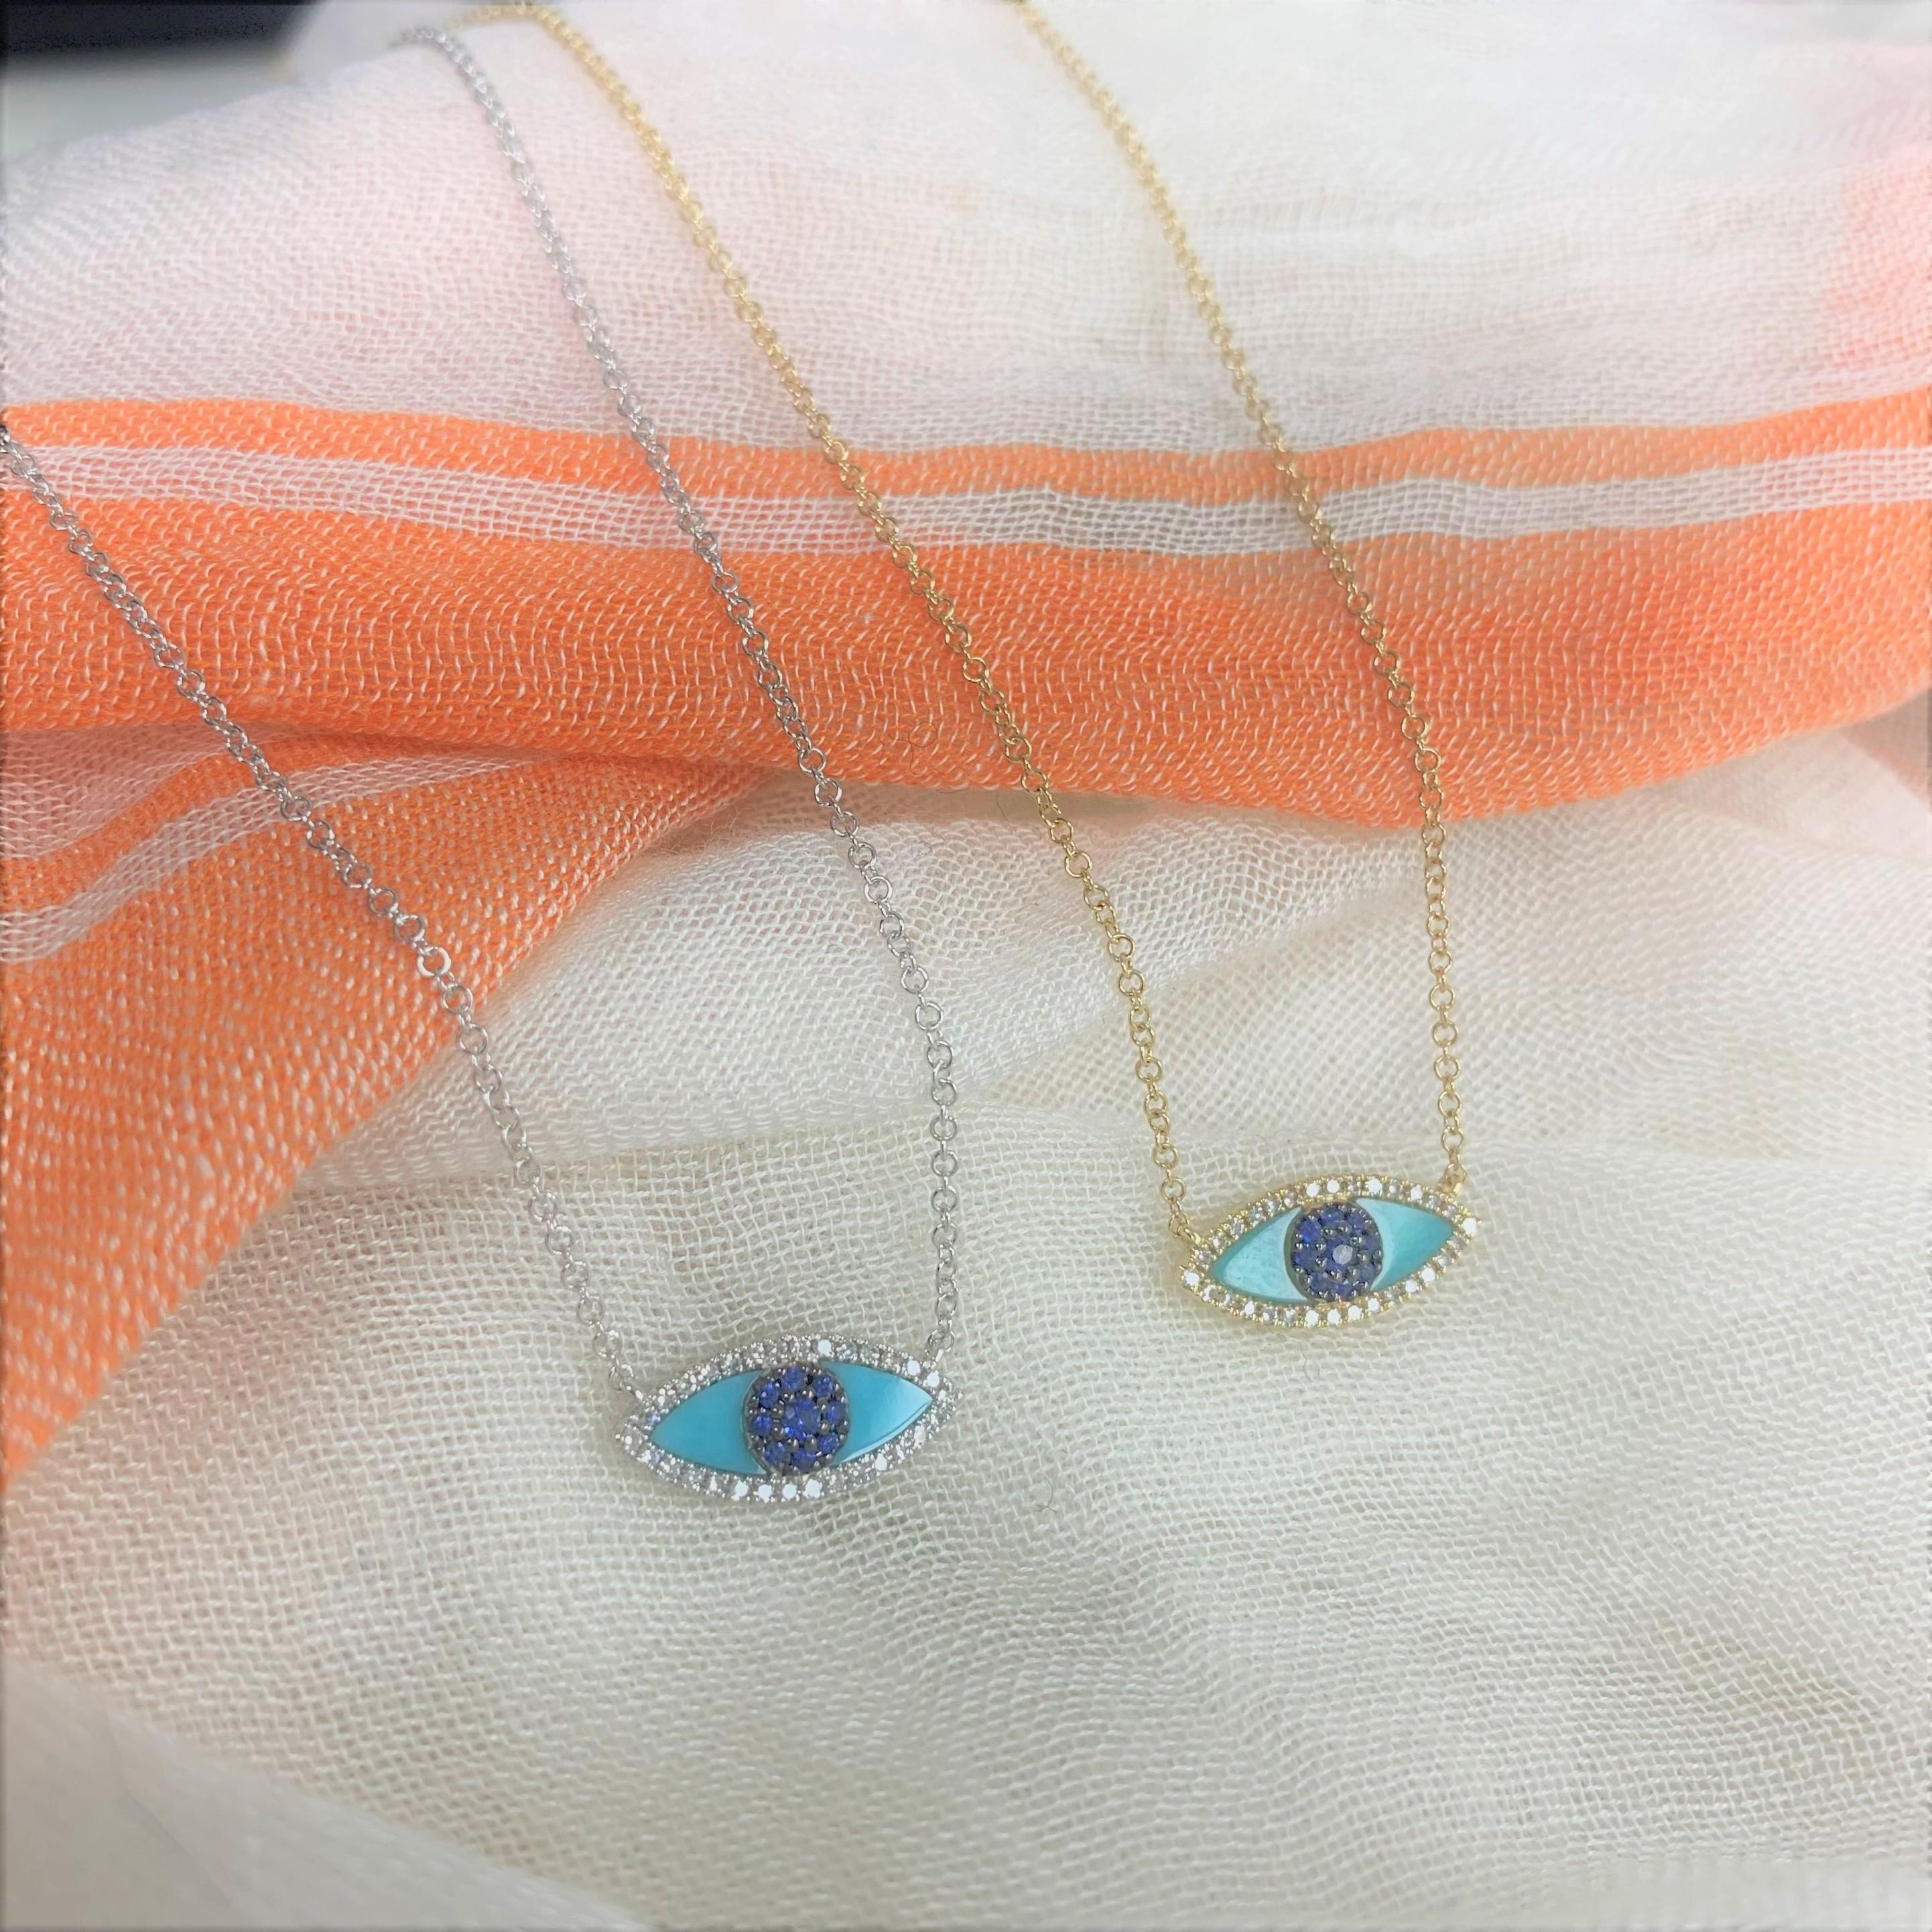 Contemporary 14k White Gold 0.08 Carat Diamond Sapphire & Turquoise Evil Eye Necklace For Sale